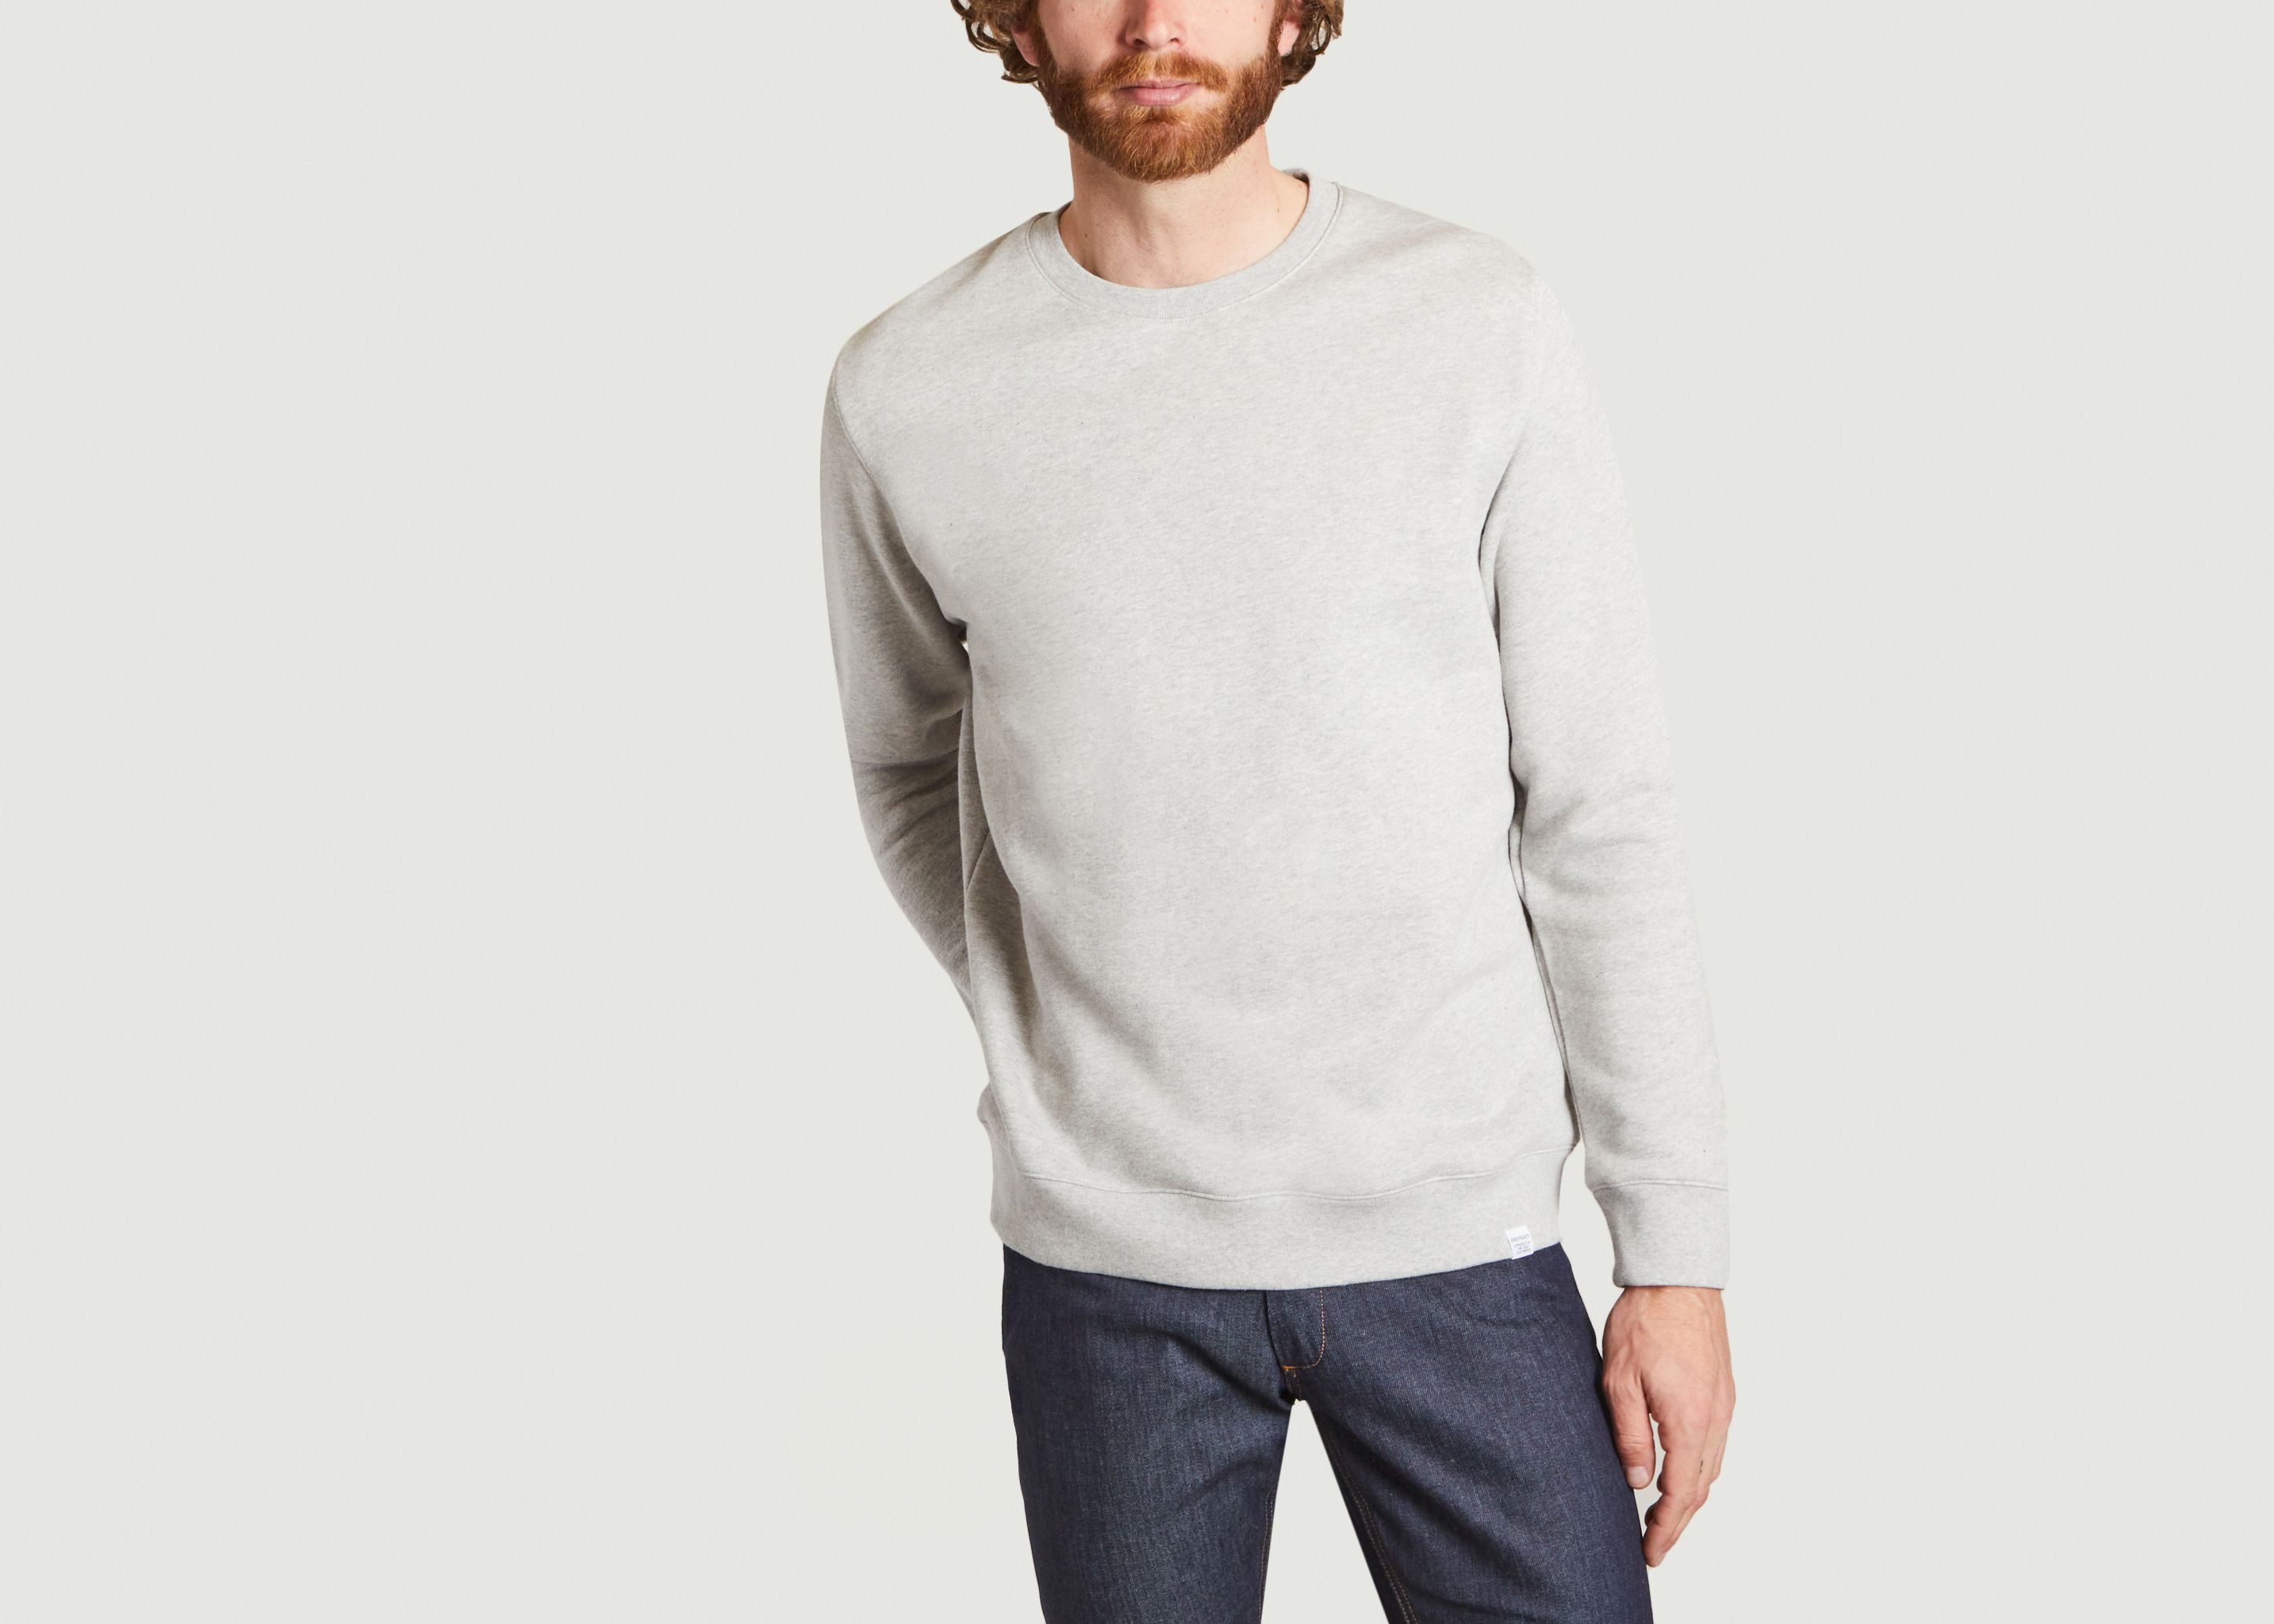 Vagn Classic sweatshirt - Norse Projects